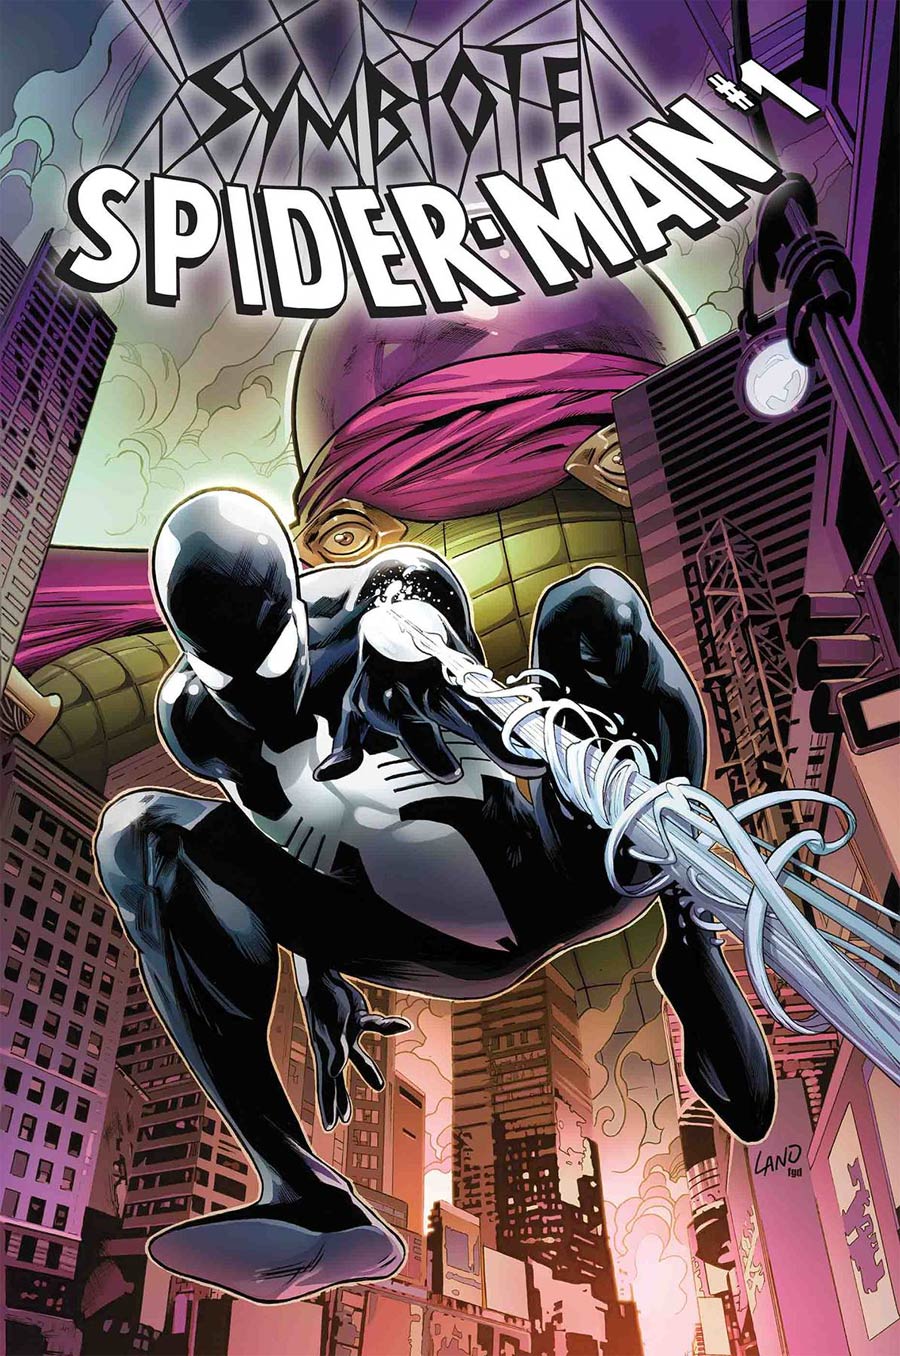 Symbiote Spider-Man #1 By Greg Land Poster